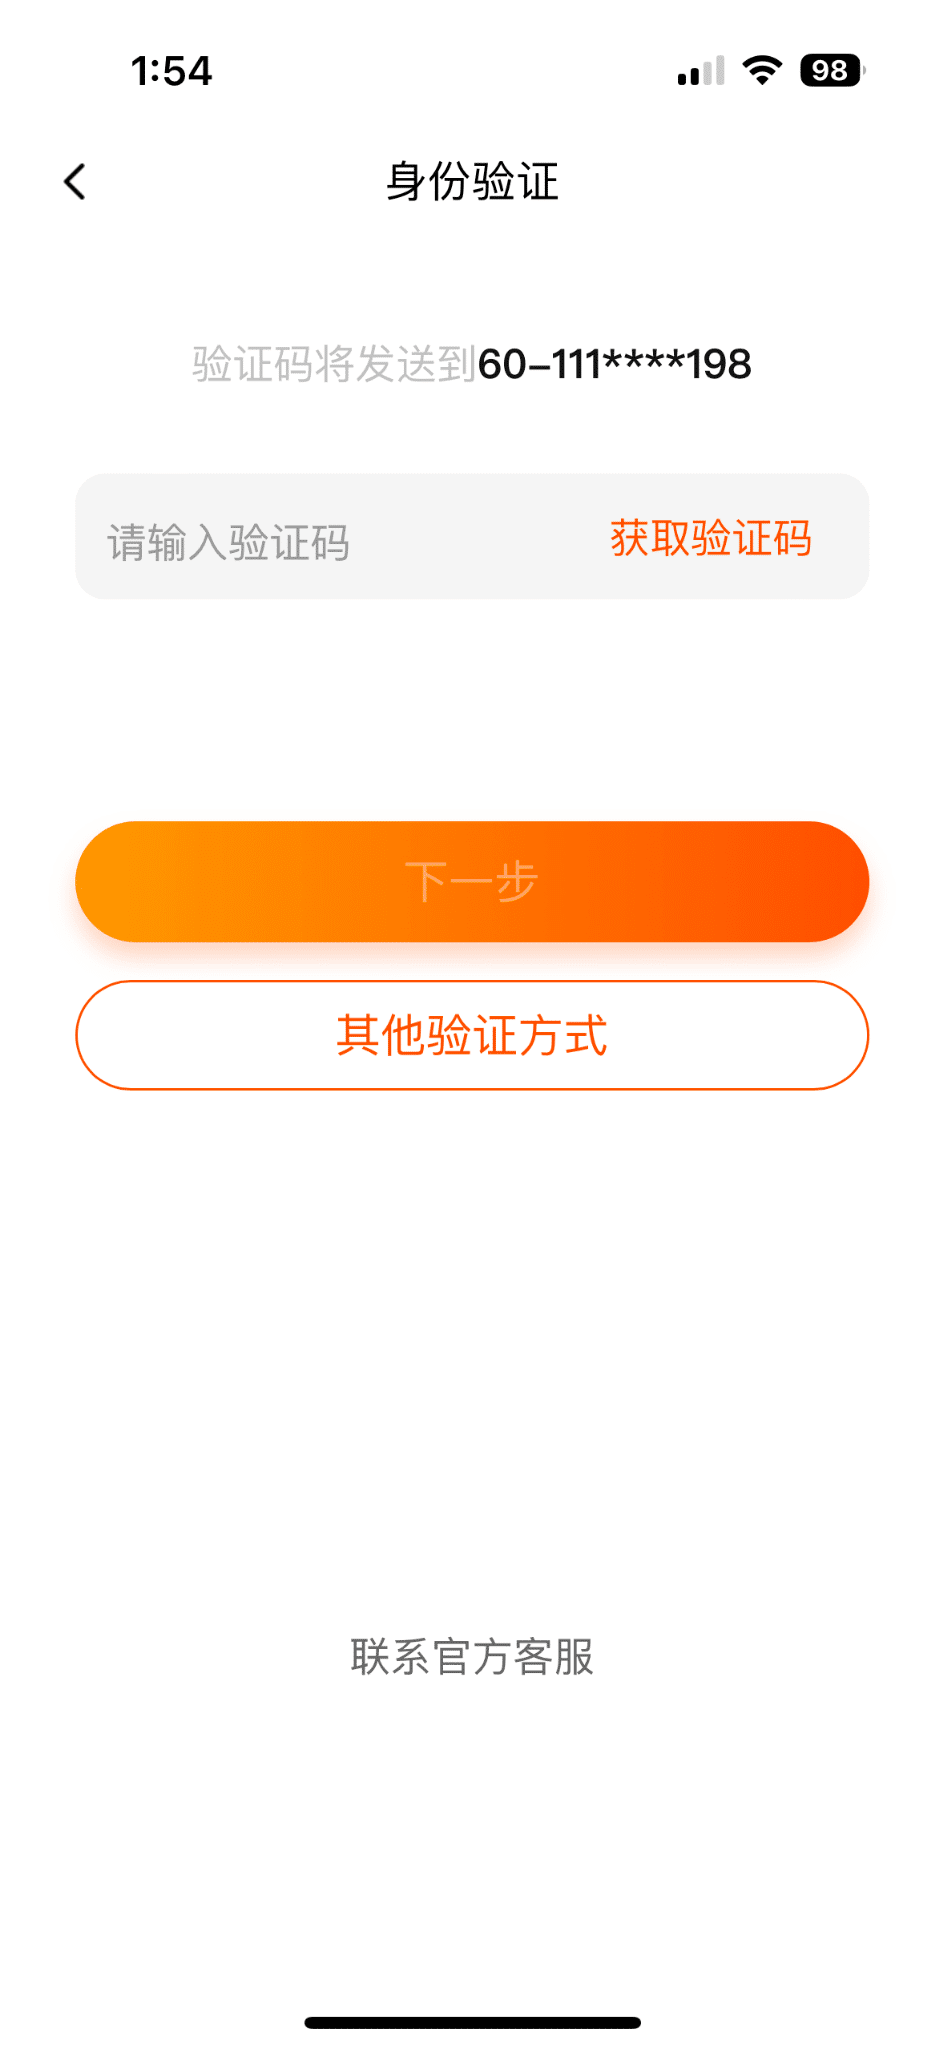 Use the forgot password feature on mobile to fix the Taobao login problem, can’t log in or sign in, or verification not sending, receiving, or working